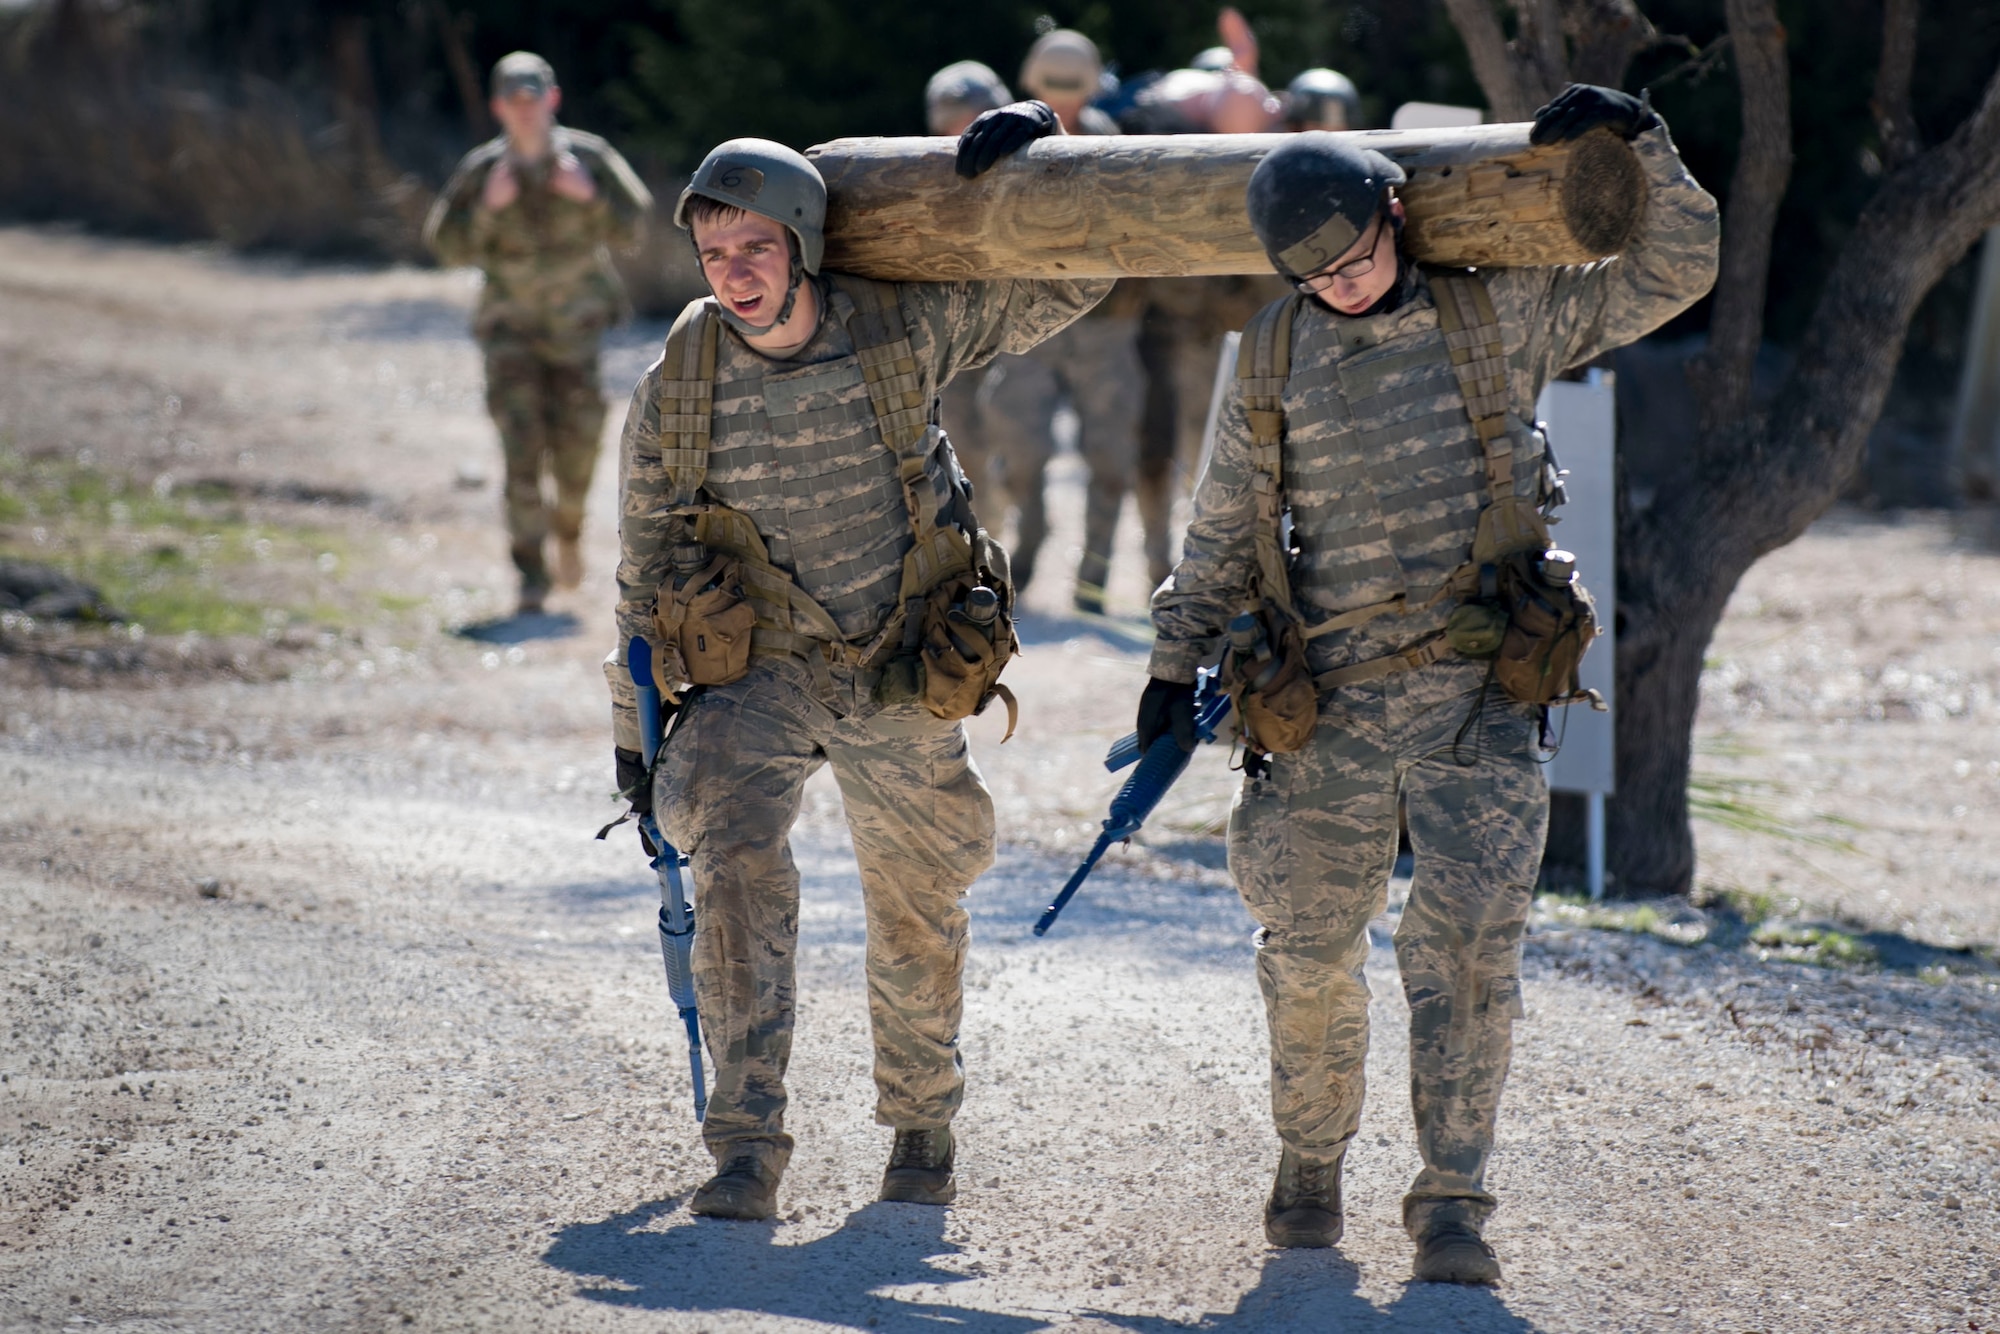 Air Force Academy cadets carry a log over their shoulders during a medical evacuation march at an Air Liaison Officer Aptitude assessment, Feb. 16, 2017, at Camp Bullis, Tx. The cadets were required to trek multiple miles carrying logs and simulated wounded to a medical evacuation zone in limited time. (U.S. Air Force photo by Airman 1st Class Daniel Snider)